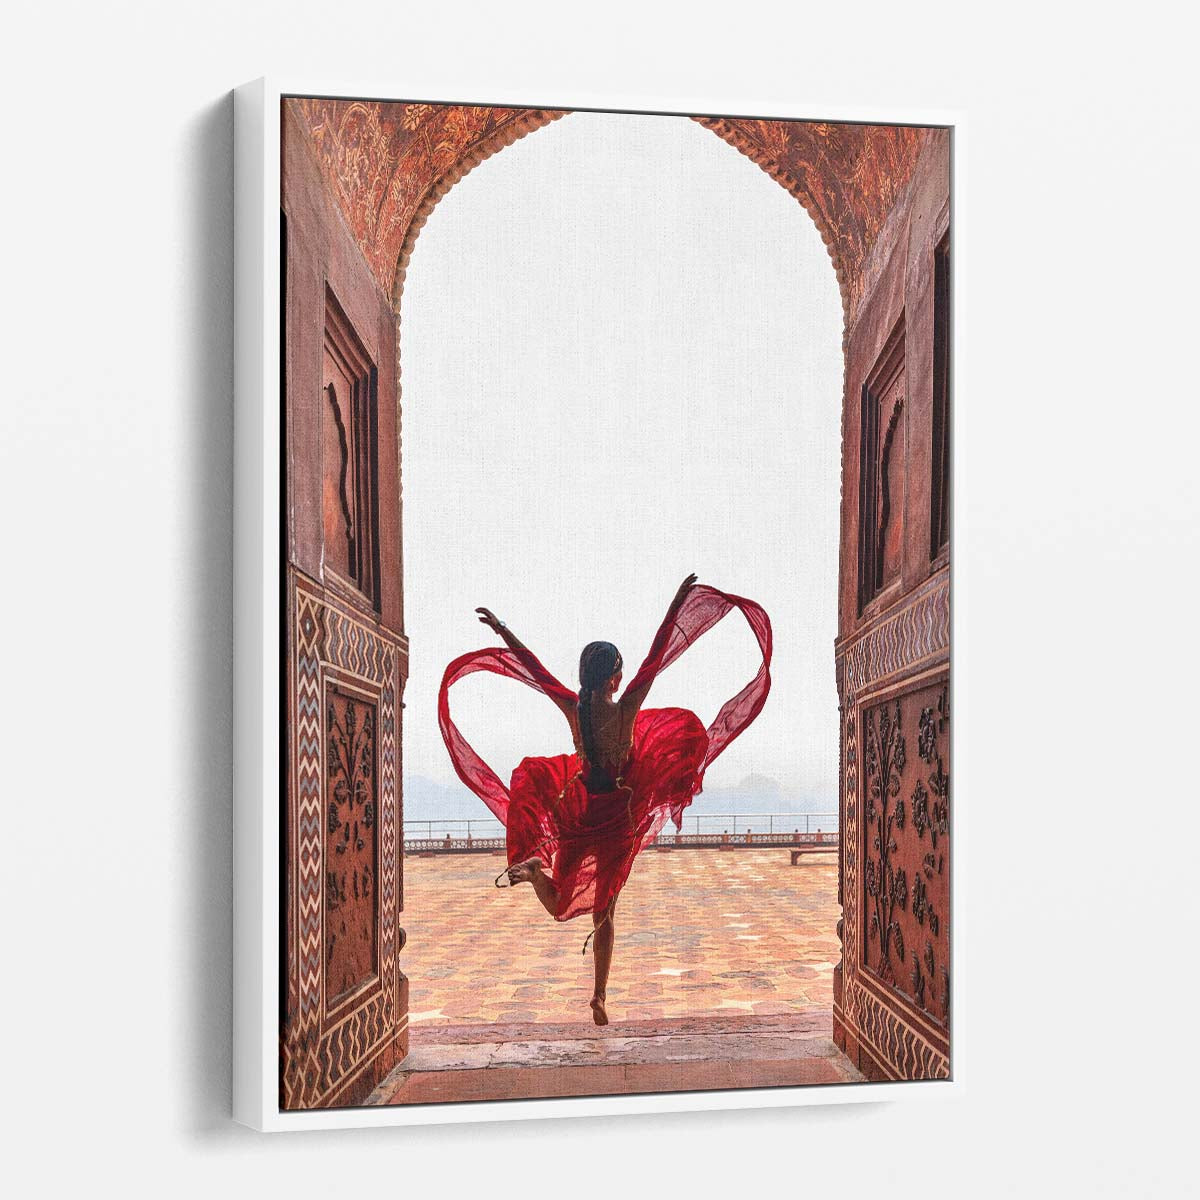 Romantic Leap at Taj Mahal Creative Photography of Couple in Red by Luxuriance Designs, made in USA